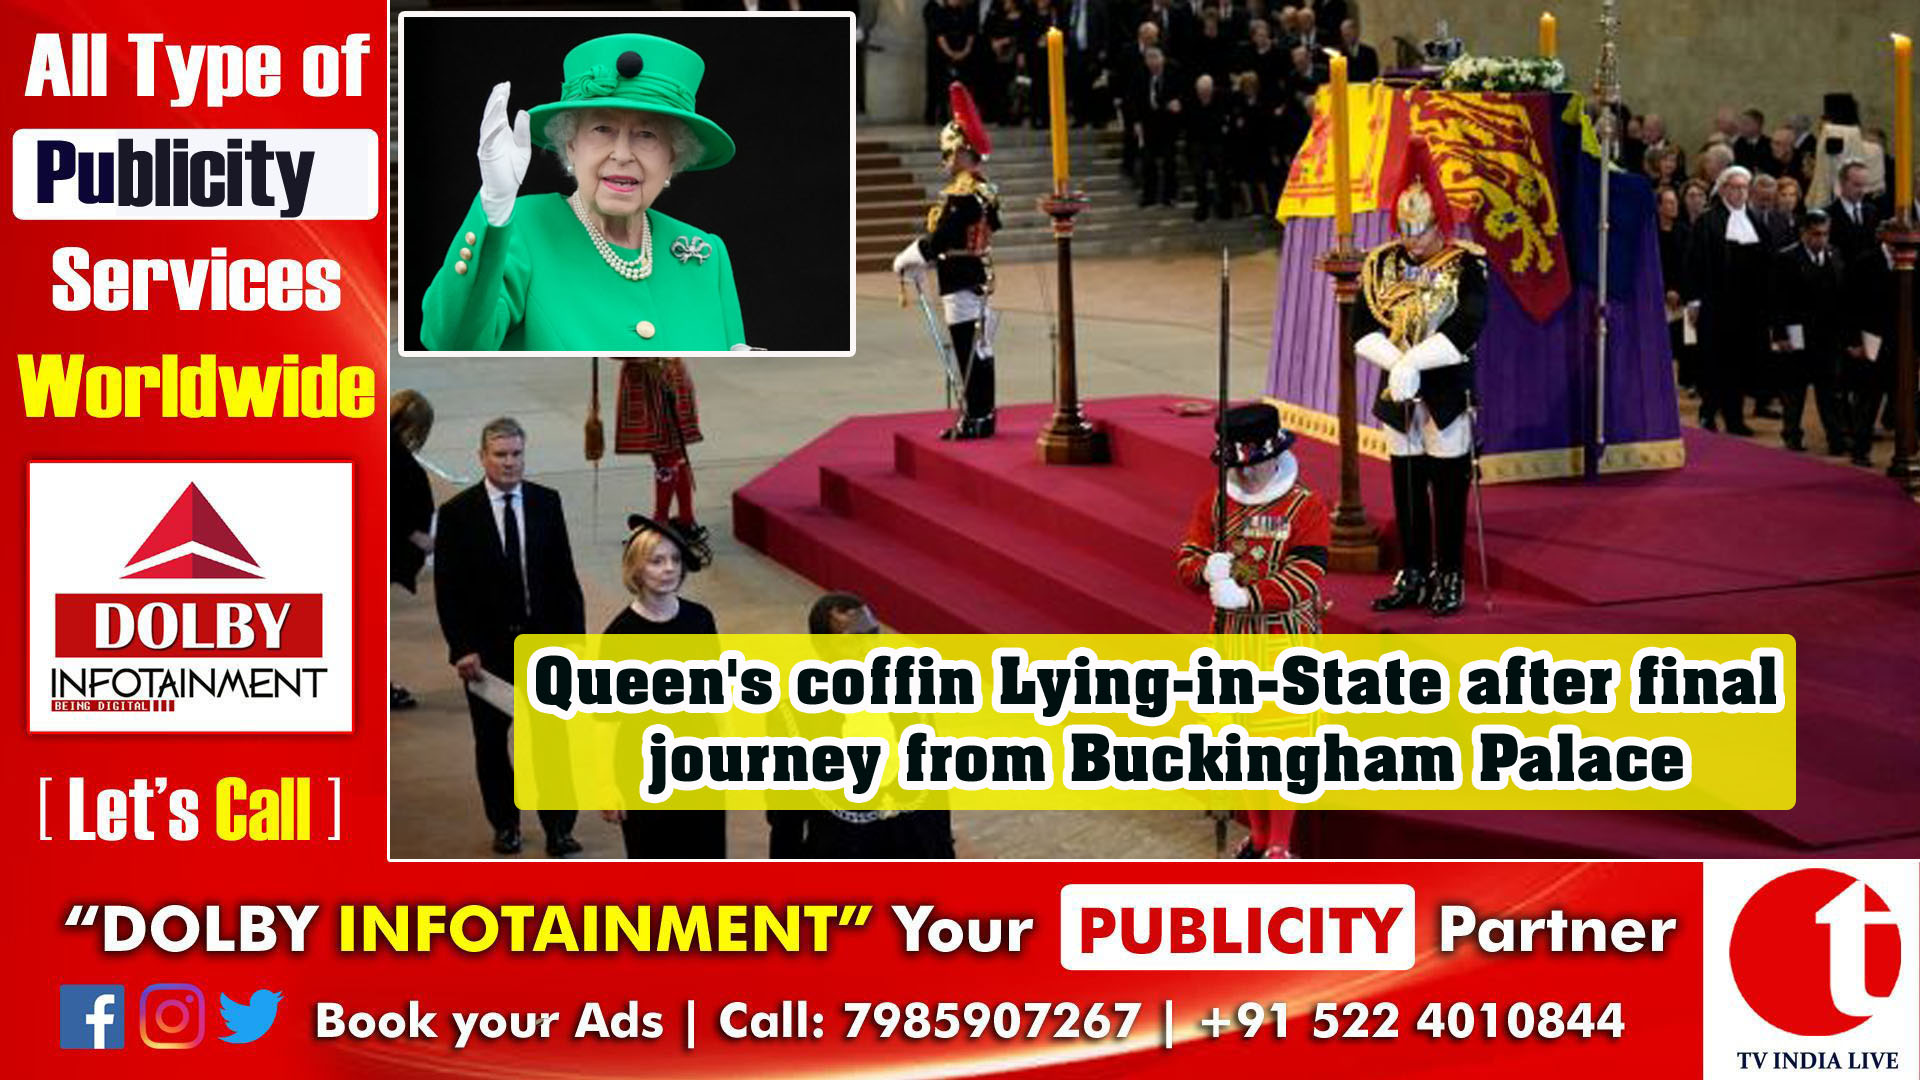 Queen's coffin Lying-in-State after final journey from Buckingham Palace